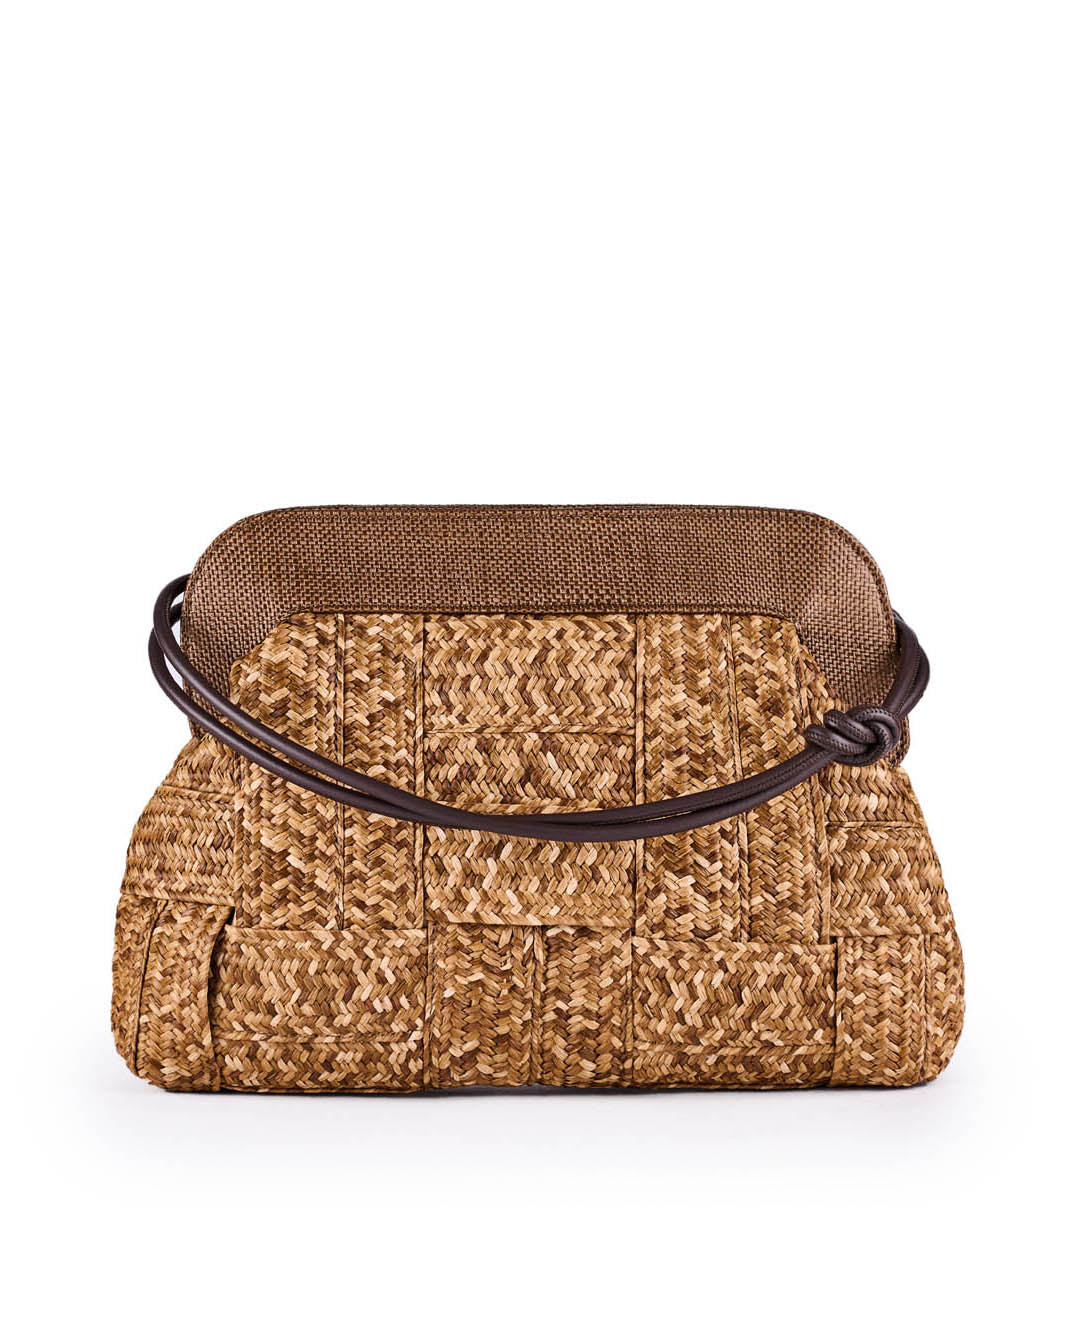 Woven straw handbag with brown leather strap and clasp